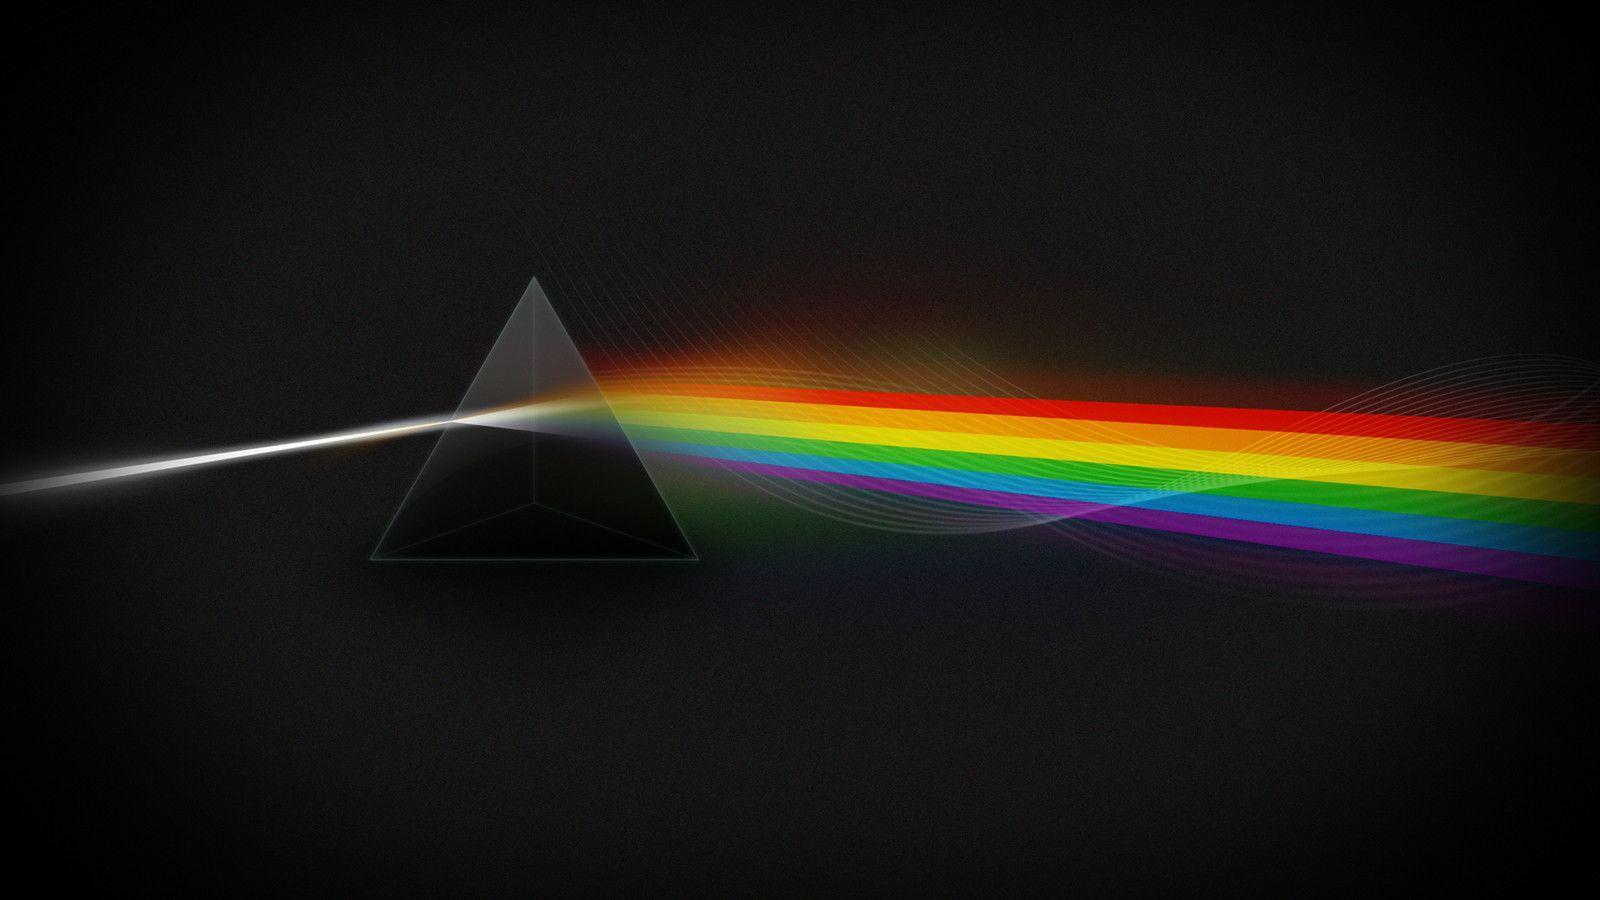 Wallpaper For > Pink Floyd Dark Side Of The Moon Album Cover